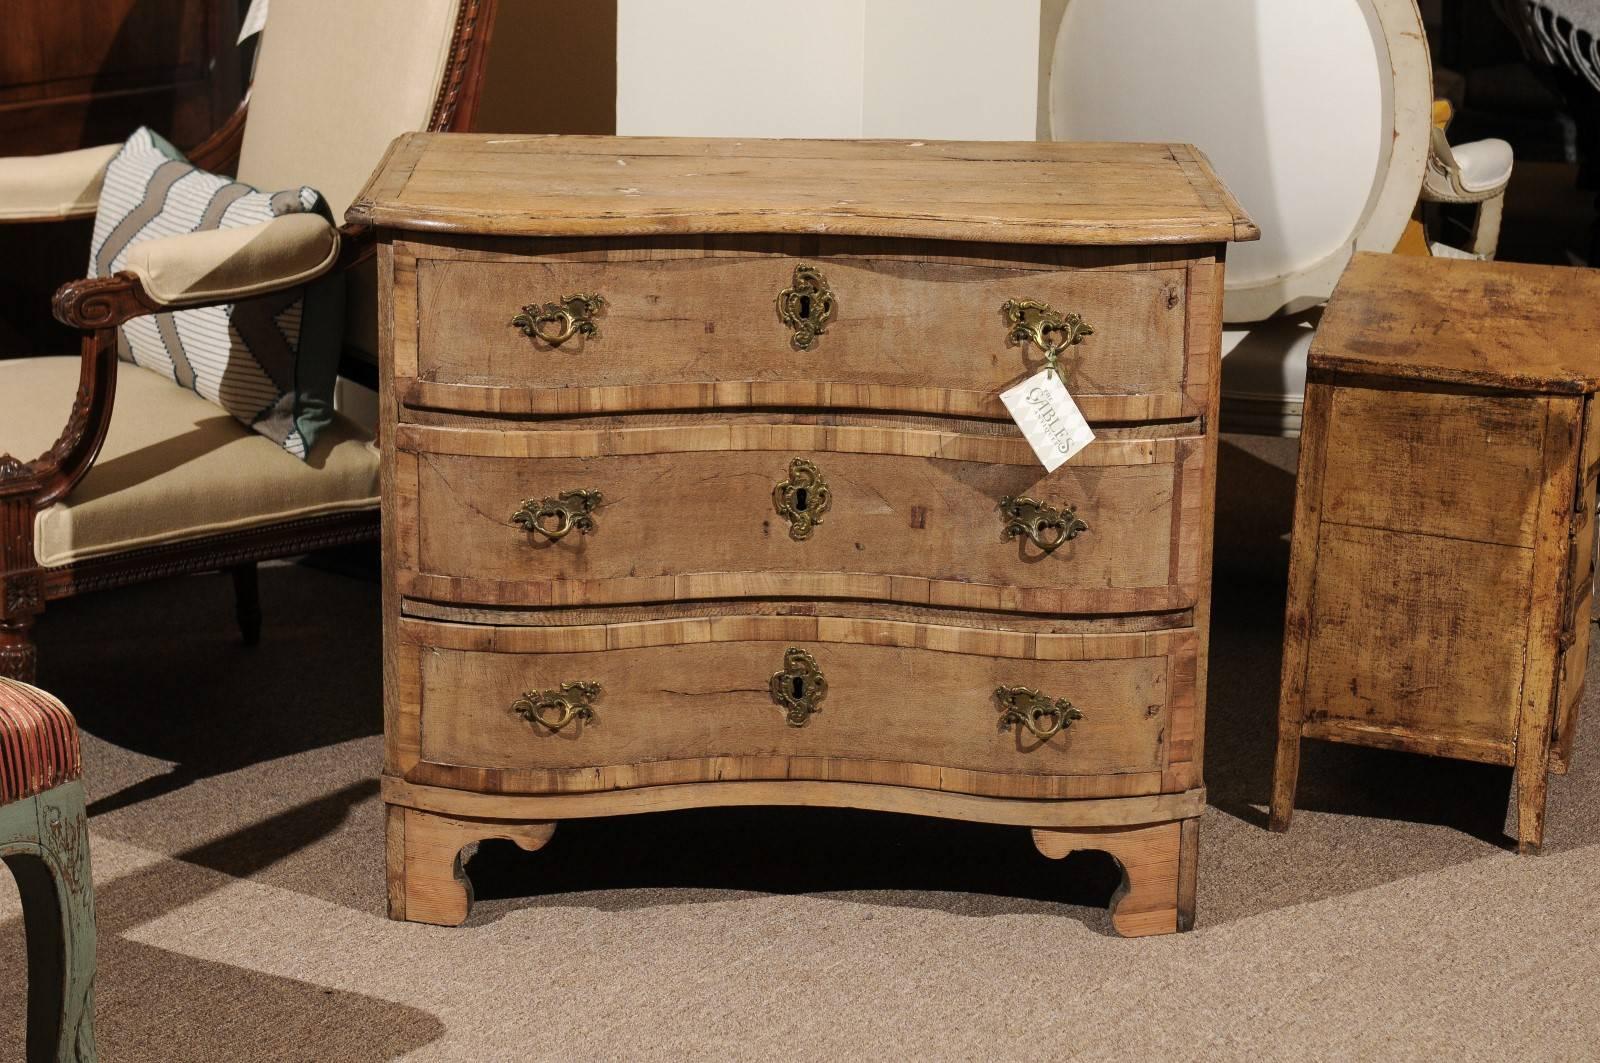 19th Century German Chest with Serpentine Front, Circa 1880
This chest has an interesting look which will appeal to a more rustic style project.  The wood seems to have been bleached to give it a lighter color.  The chest has several nice details